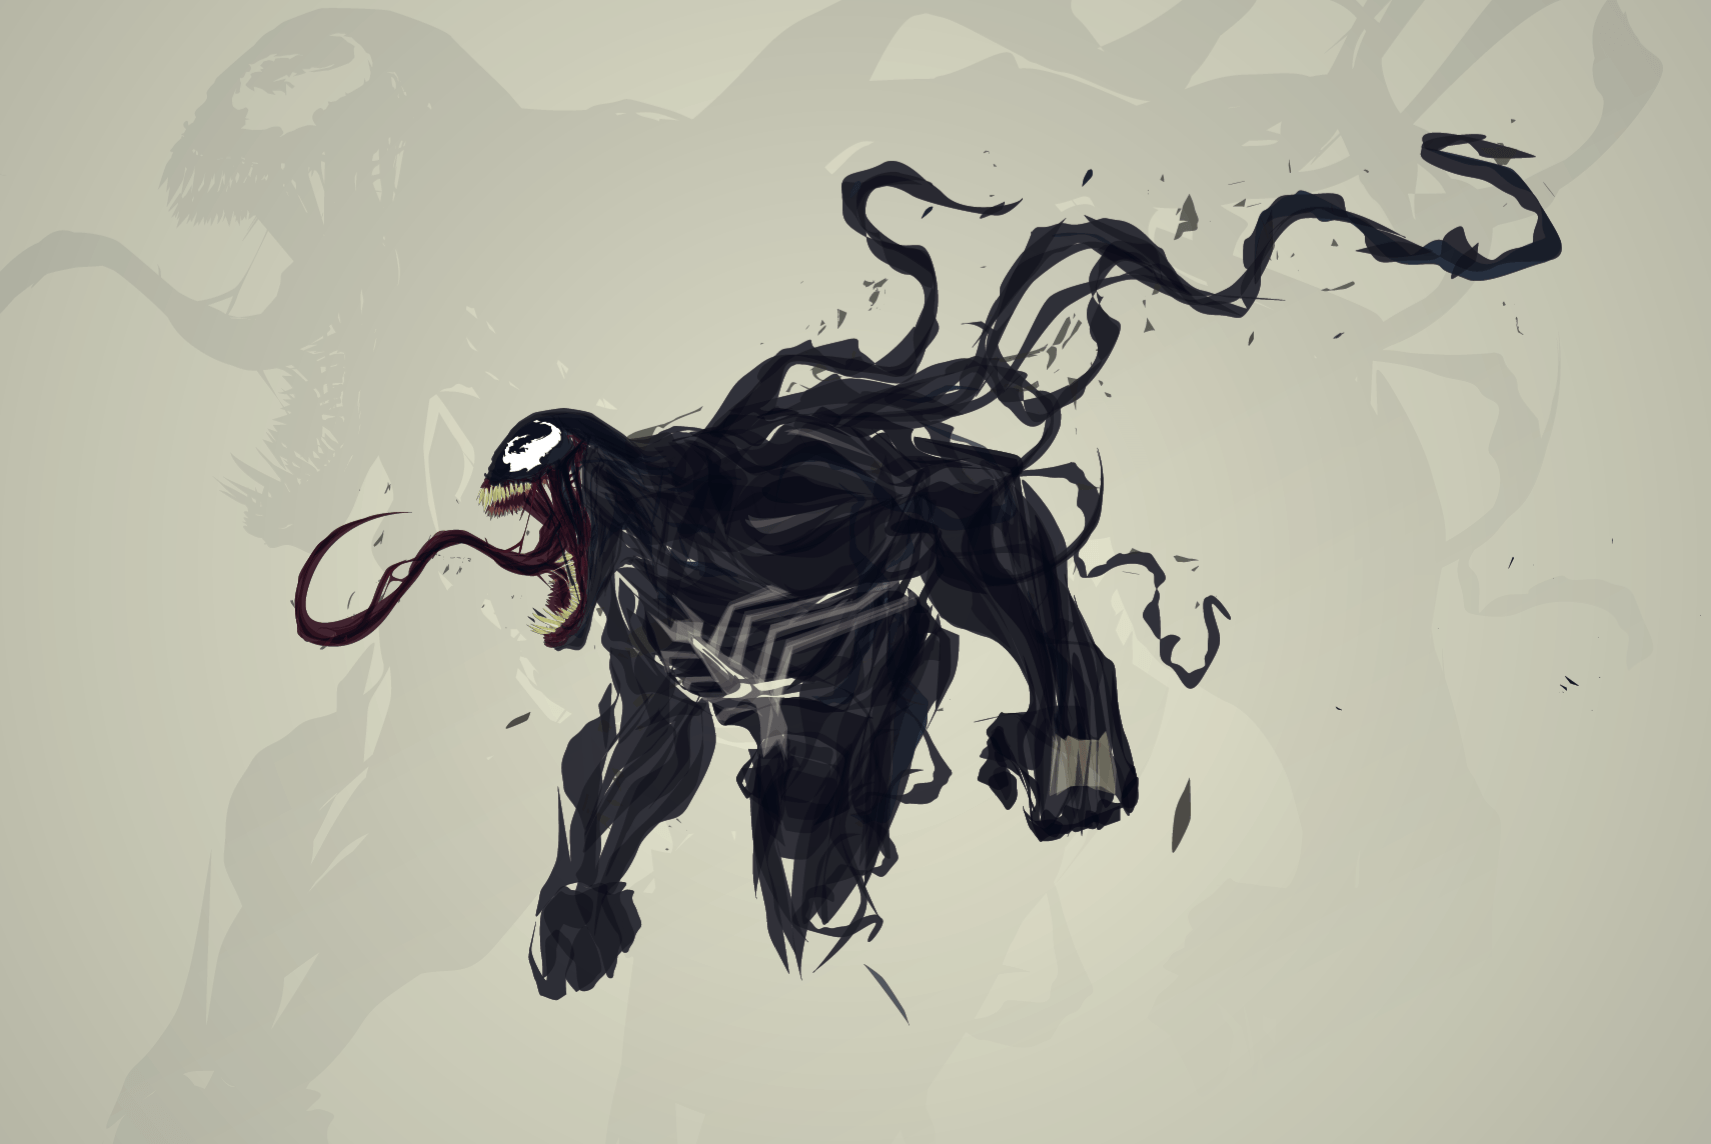 The symbiotic beast known as Venom gets vectorized. Rampaged